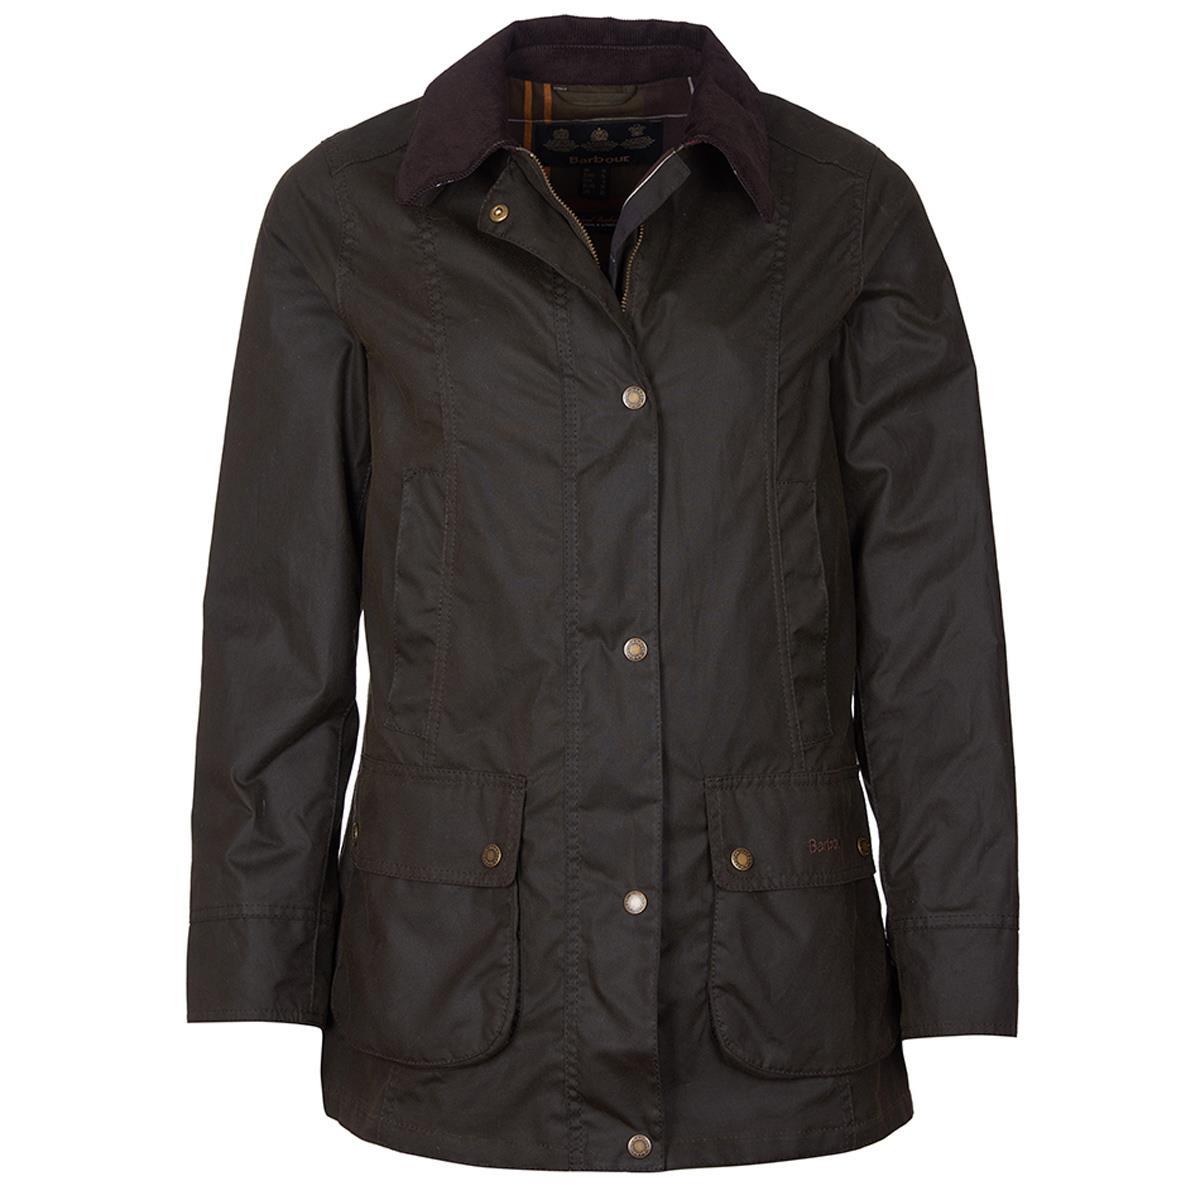 What are the key attributes of the Barbour Fiddich Women's Wax Jacket?